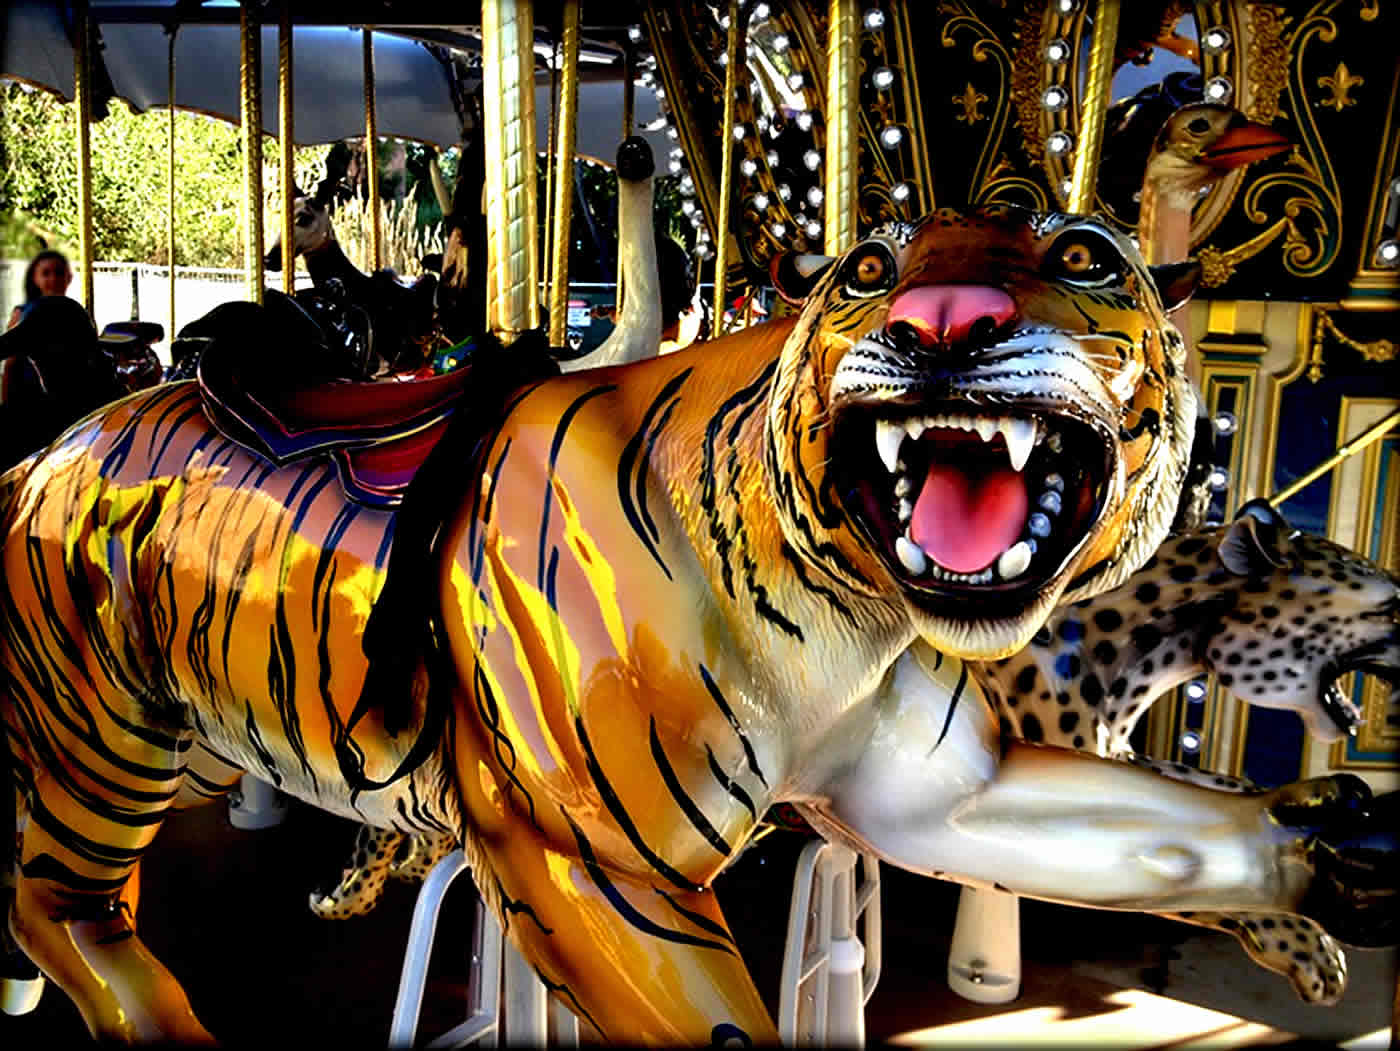 Image of a tiger on a merry go round.